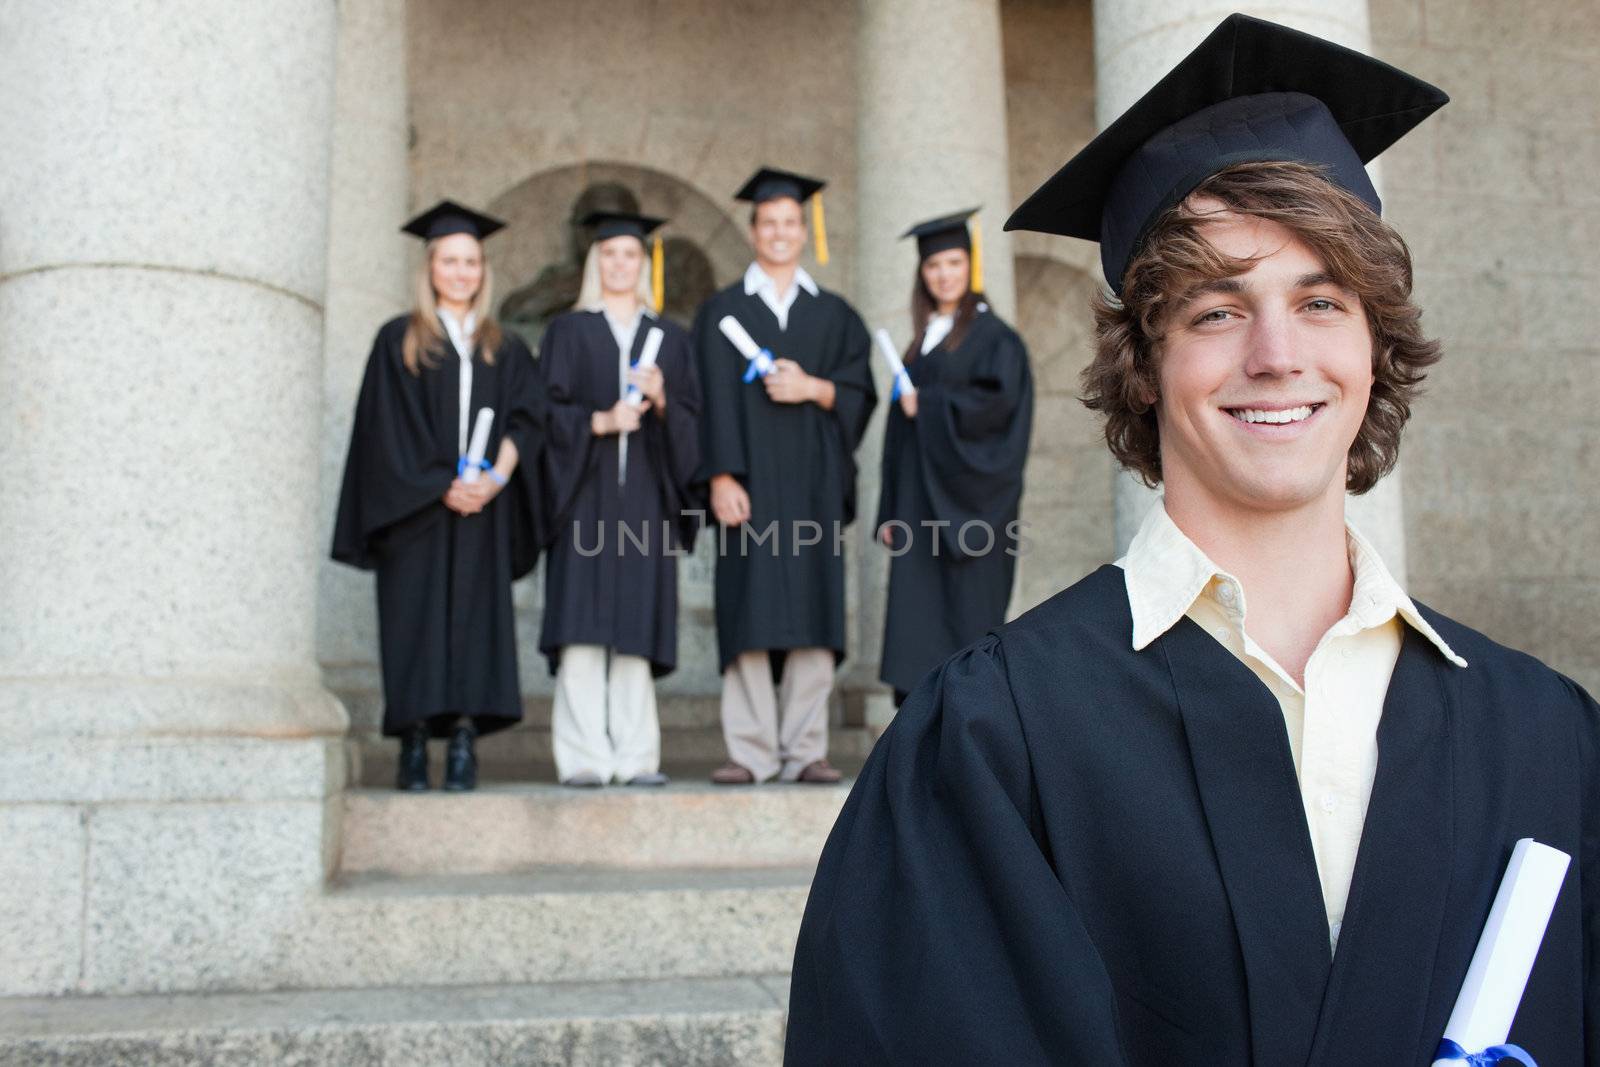 Close-up of a smiling graduate smiling with her friends in background in front of the university